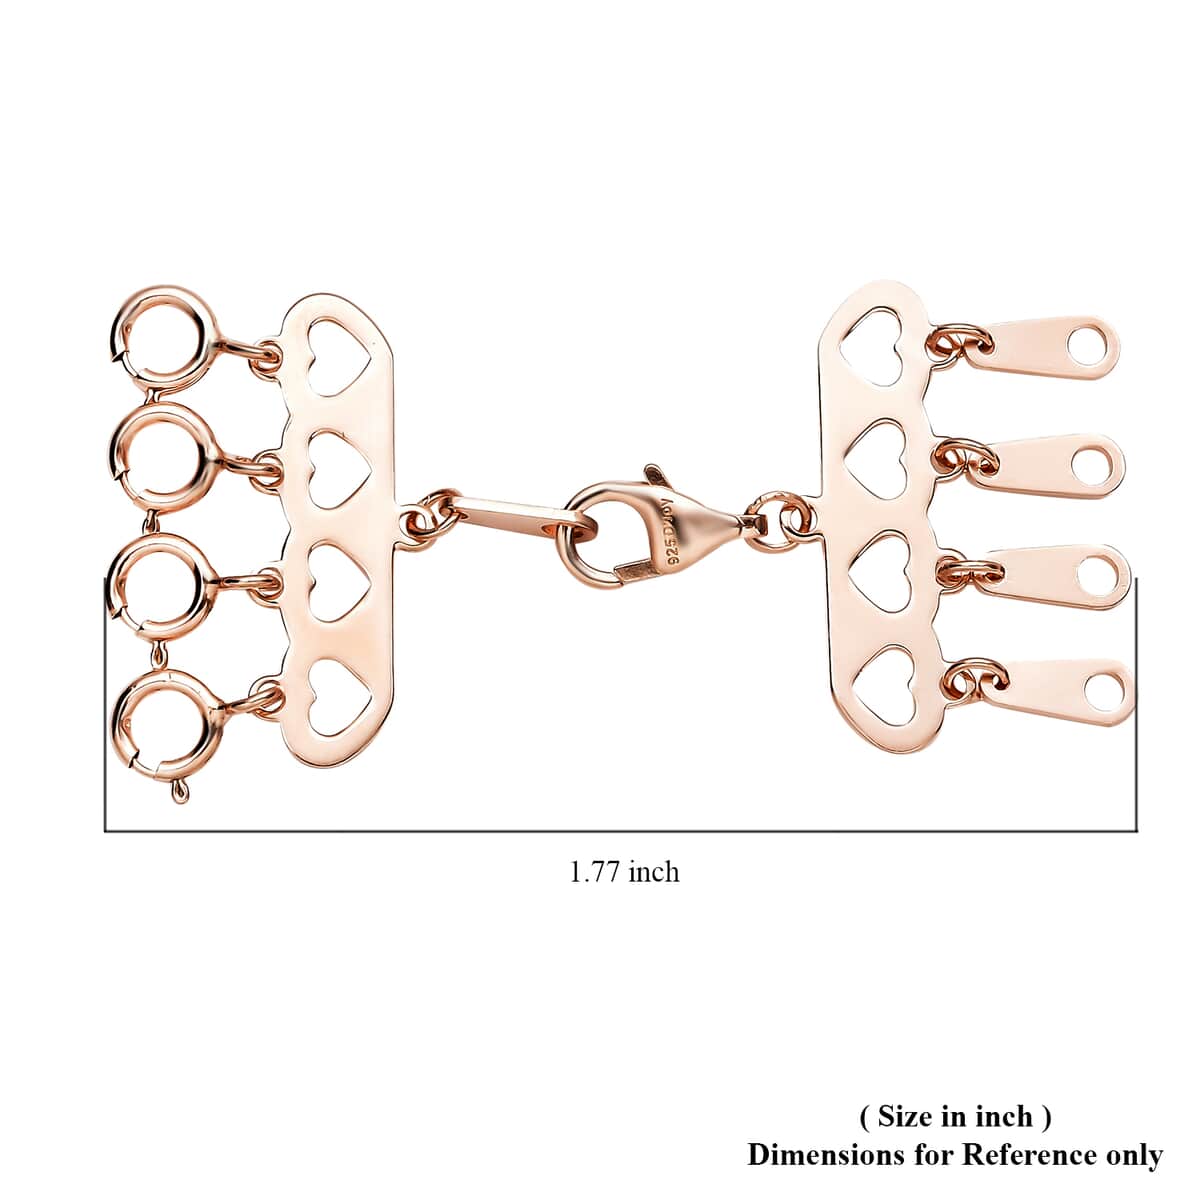 4 Row Hearts Layering Lock in 14K RG Over Sterling Silver with 9mm Lobster Lock and 4pcs 5mm Spring Locks | Jewelry Spring Lock image number 4